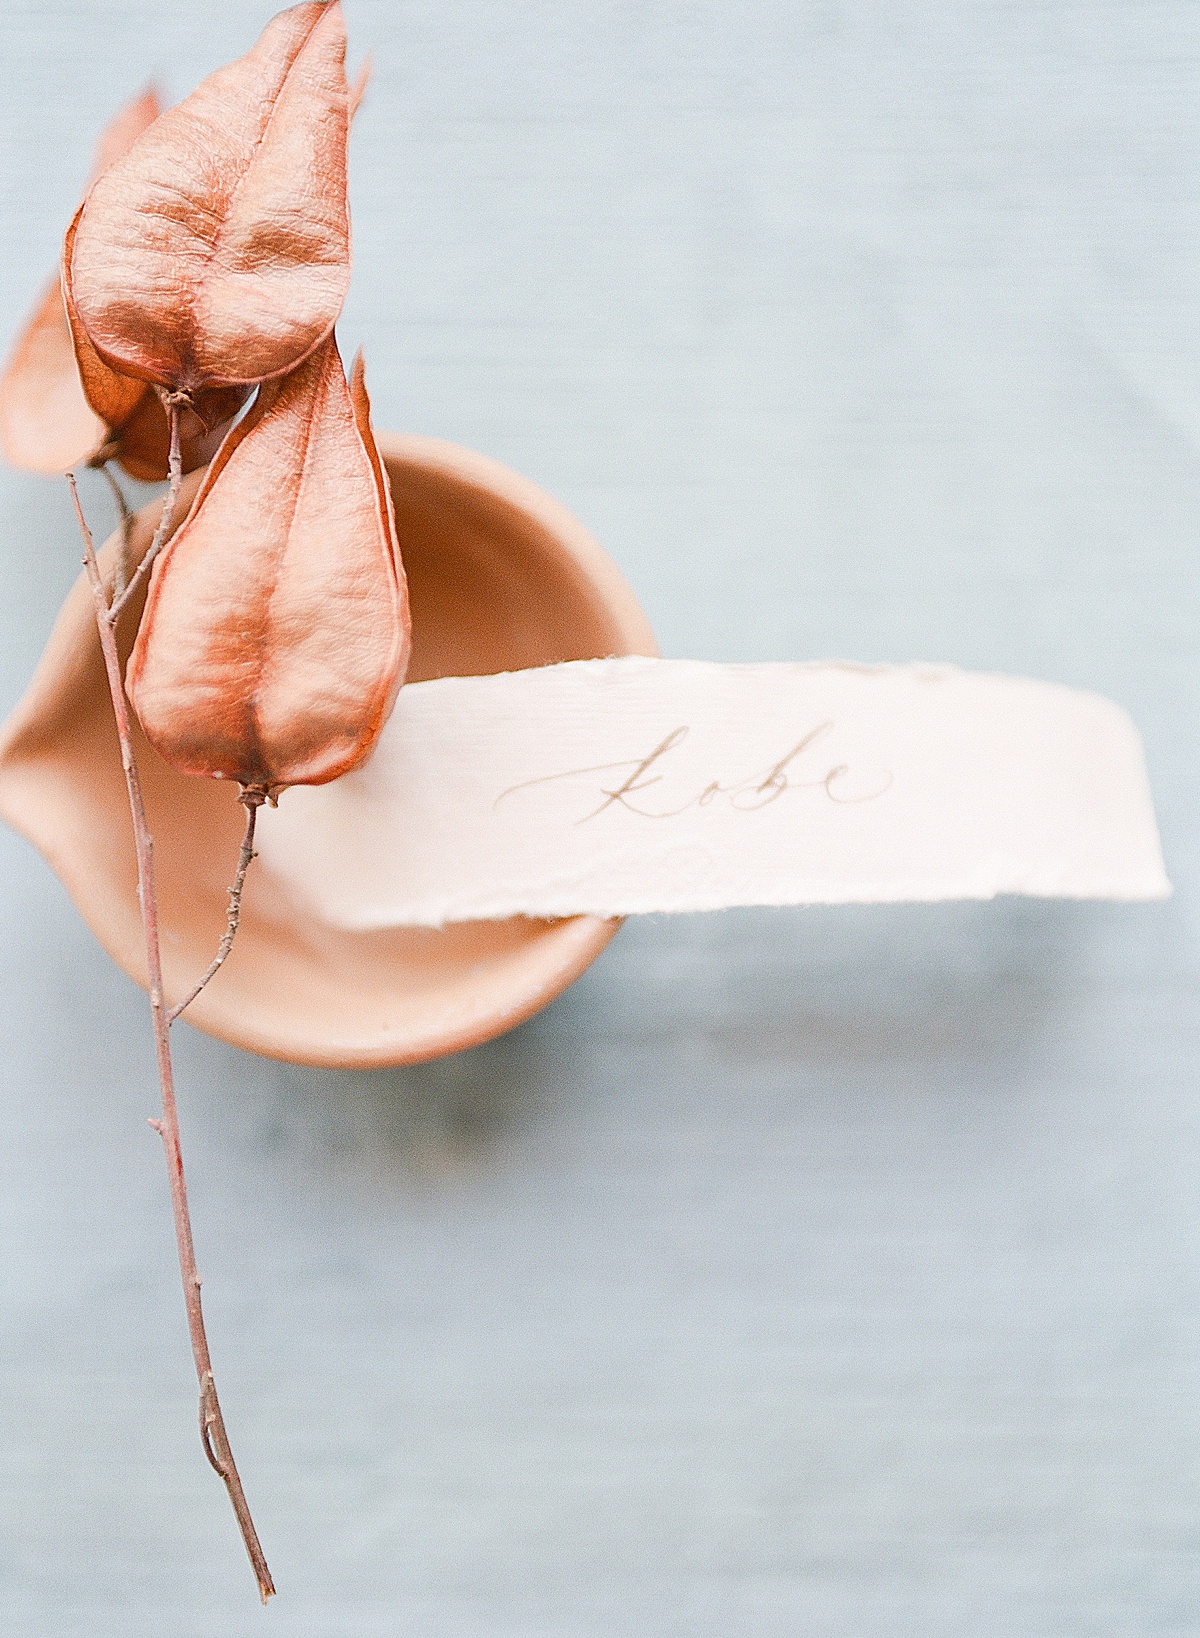 Yosemite Wedding Detail Dried Flower Name Tag and Terracotta Bowl Photo